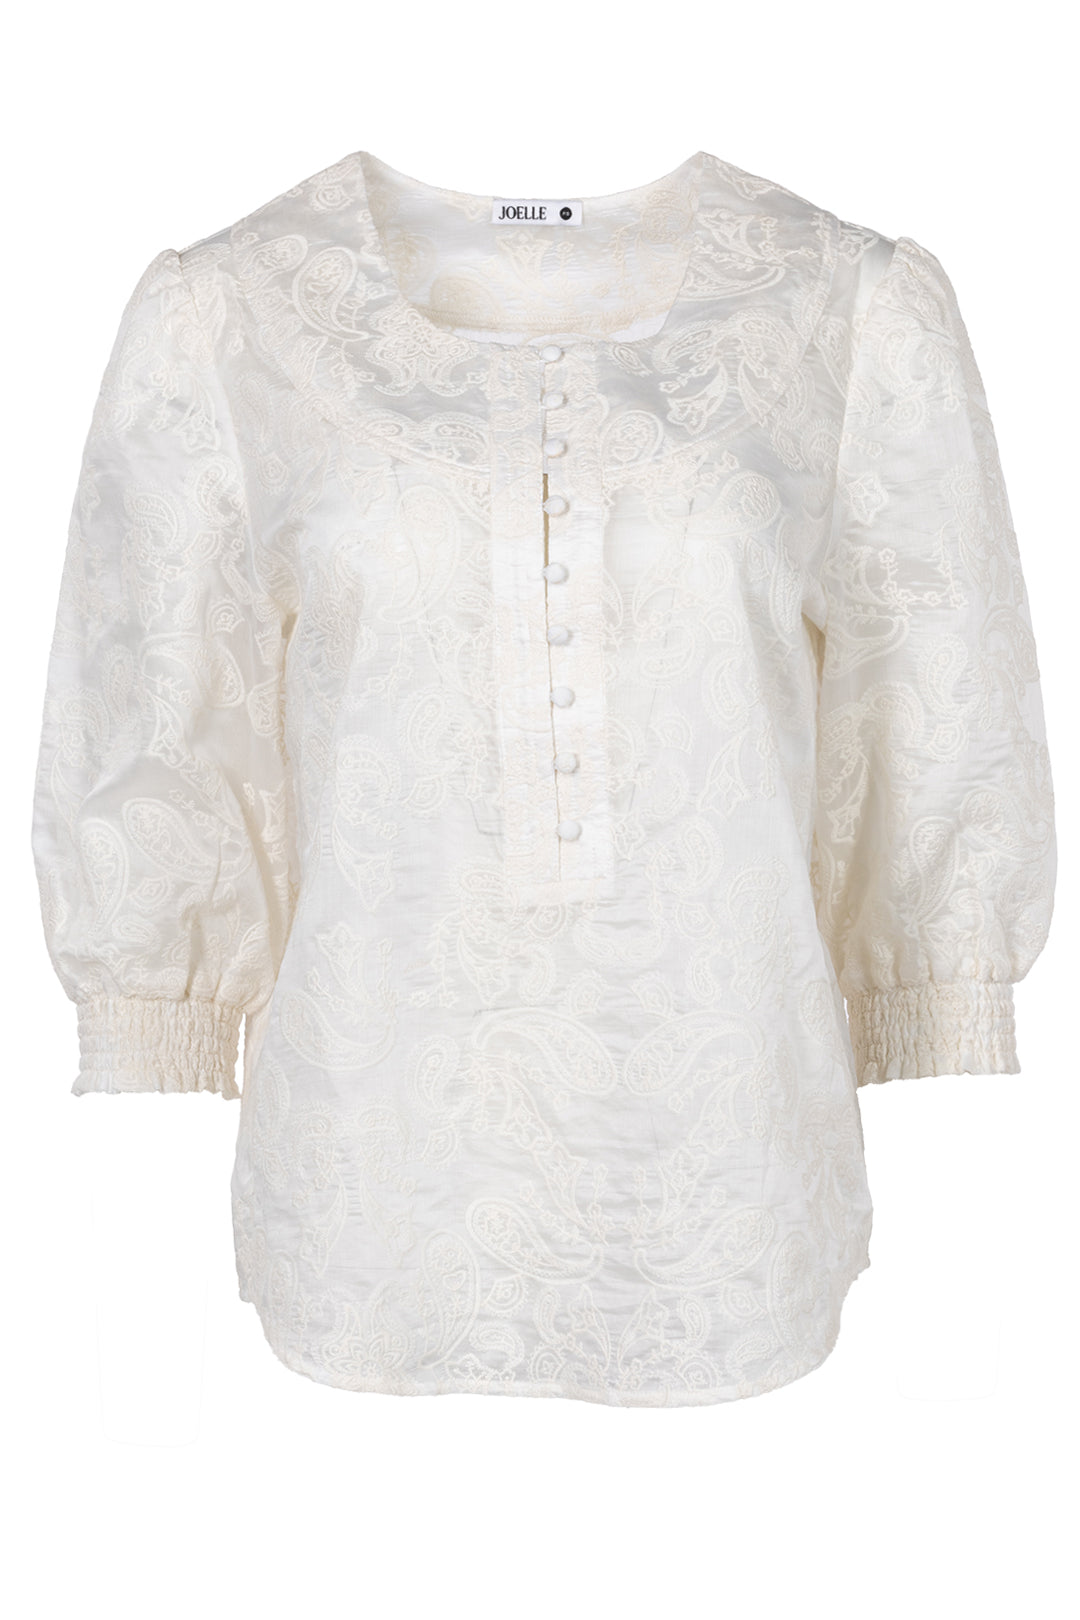 White blouse with short puff sleeves | Juliana